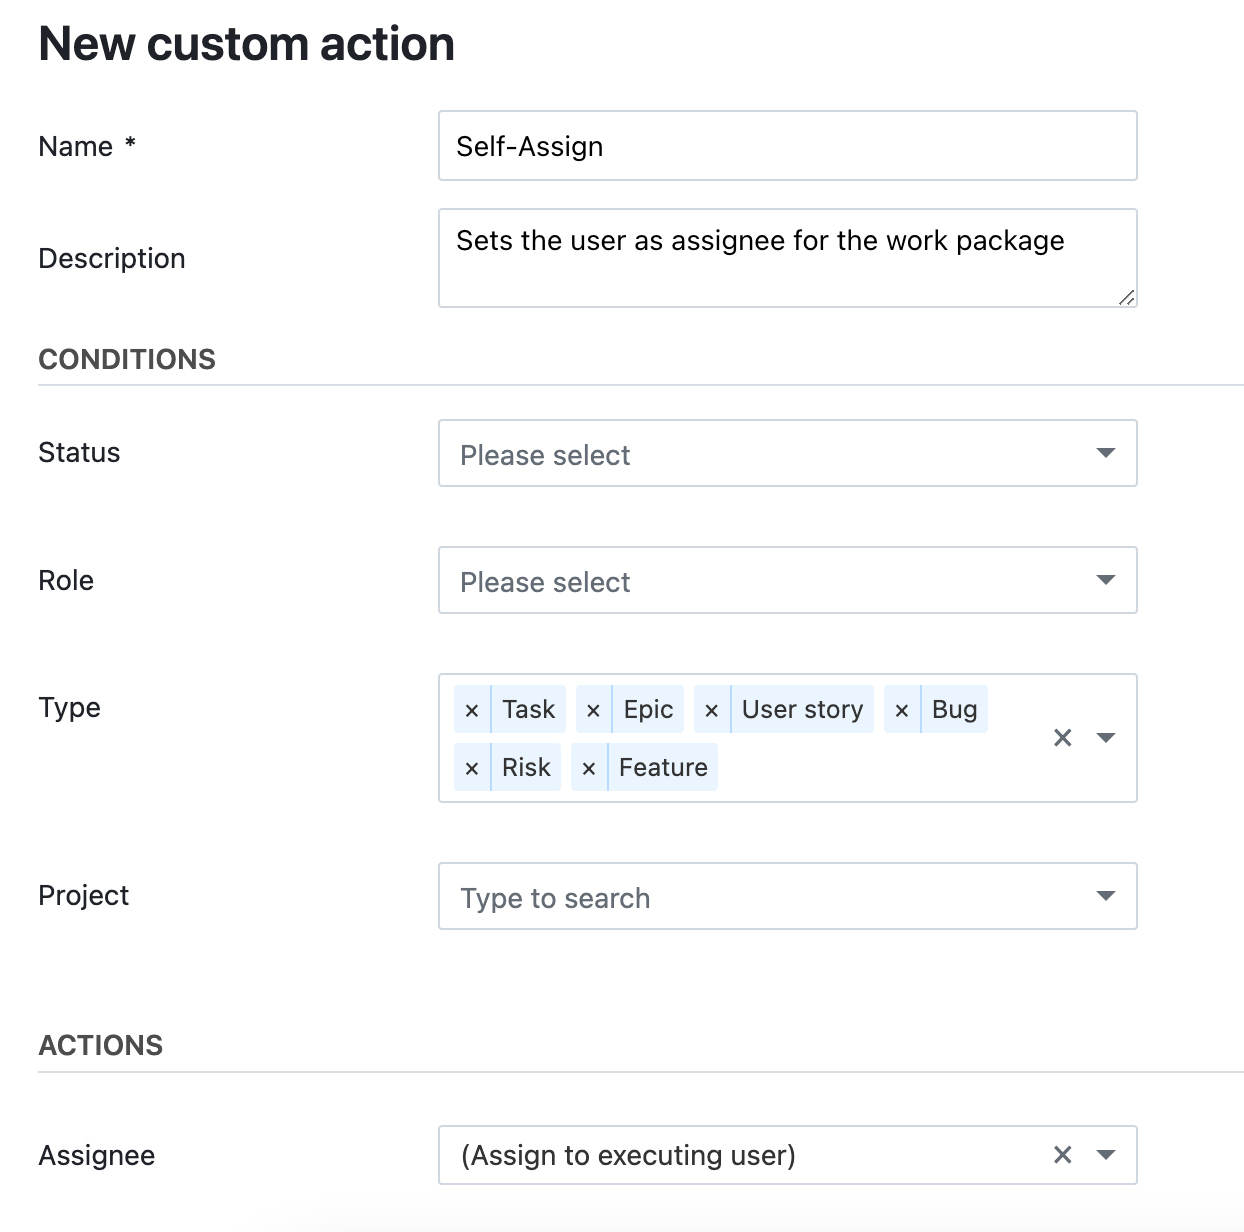 Filled out form to create a custom action for a self-assign button